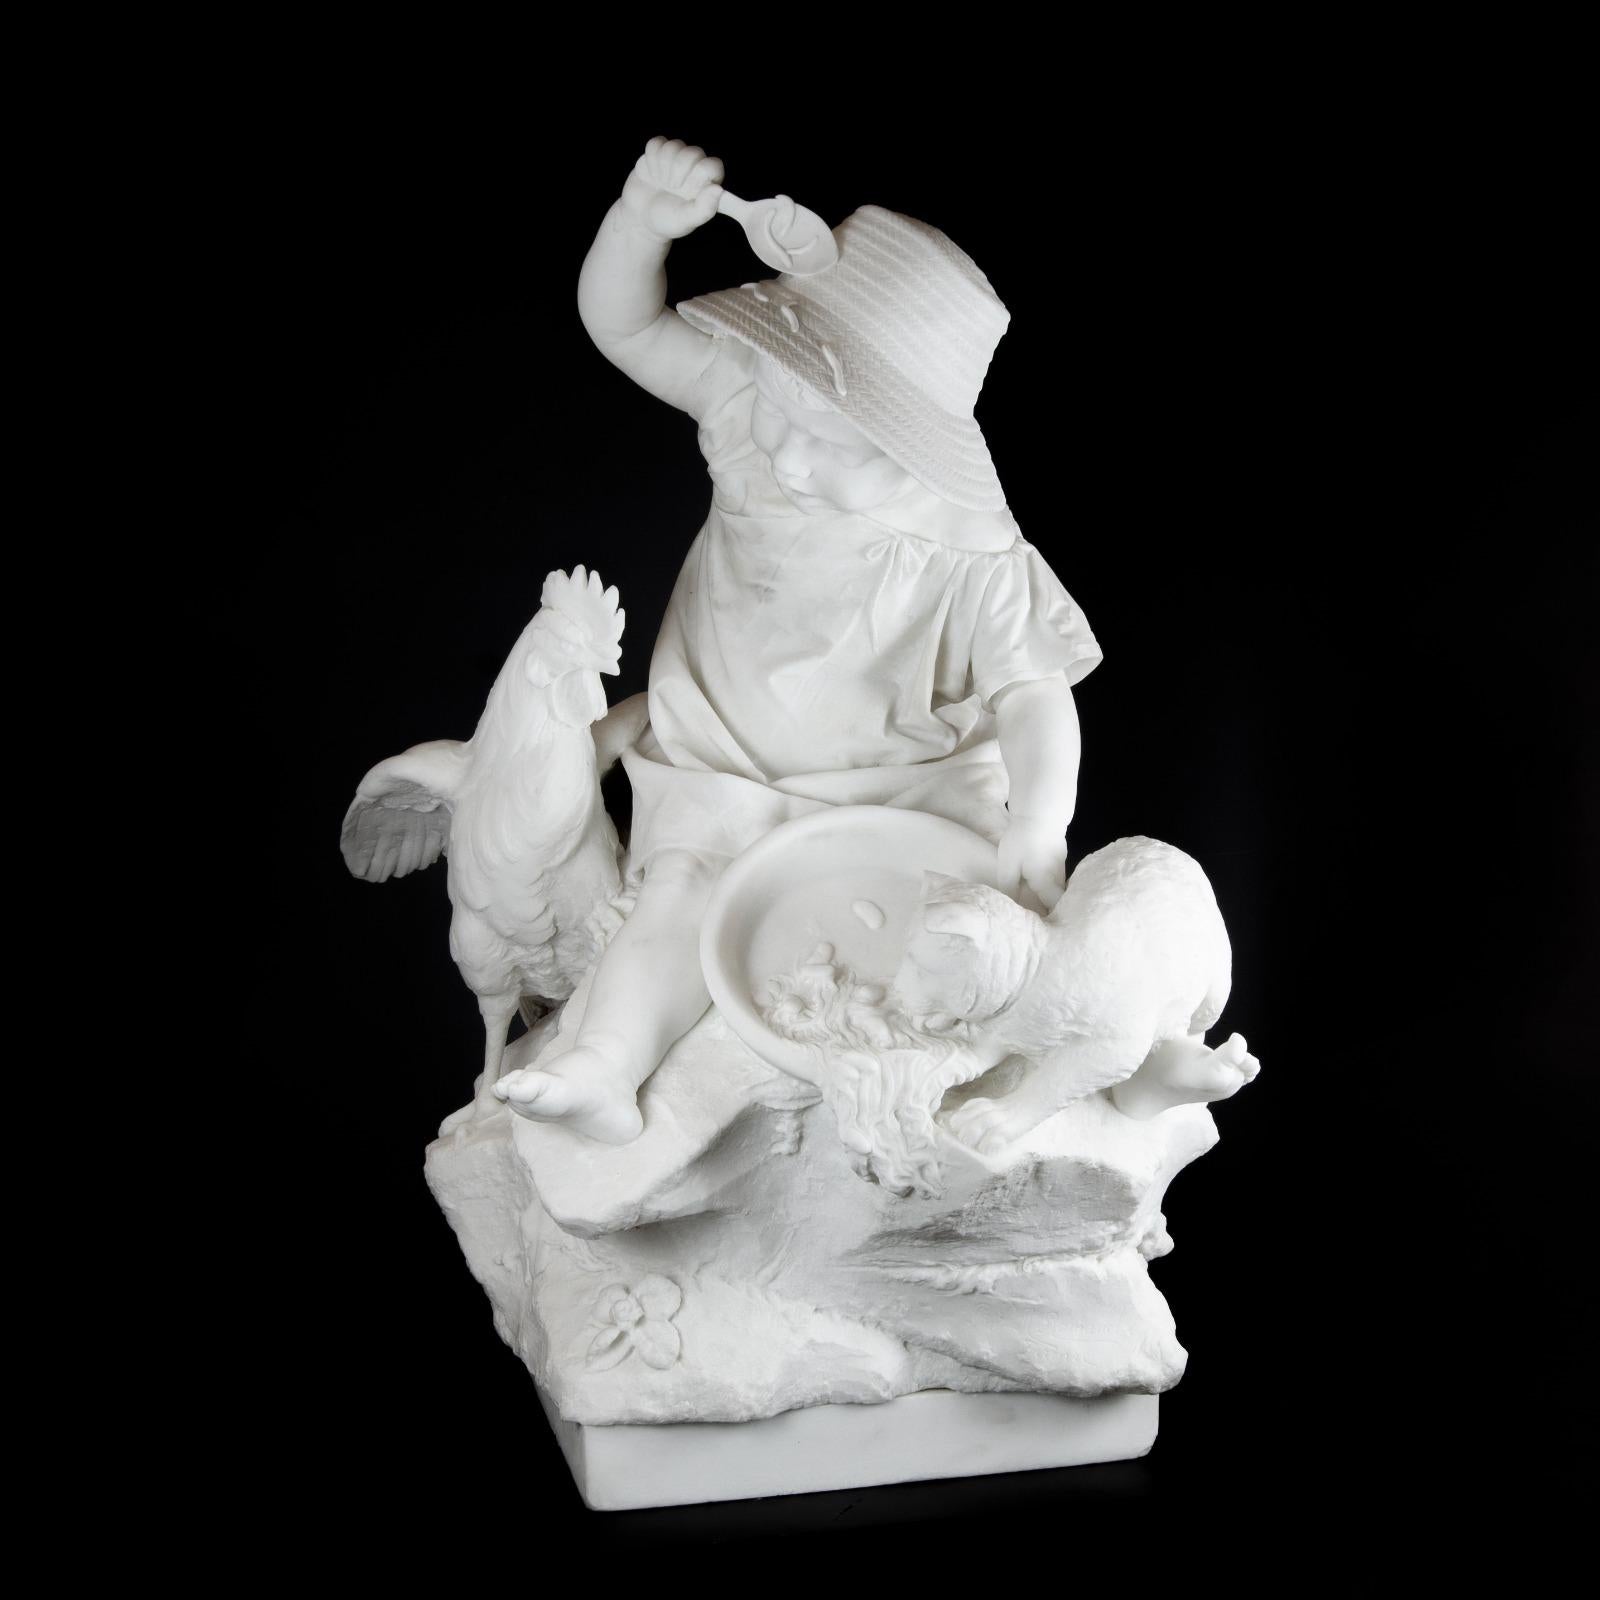 Ancient Italian Carrara marble sculpture by Raffaello Romanelli 19th century
Magnificent Carraca Marble Sculpture that represents a child next to a chicken that drops its food, while a kitten steals it. It has a quality in the details, such as